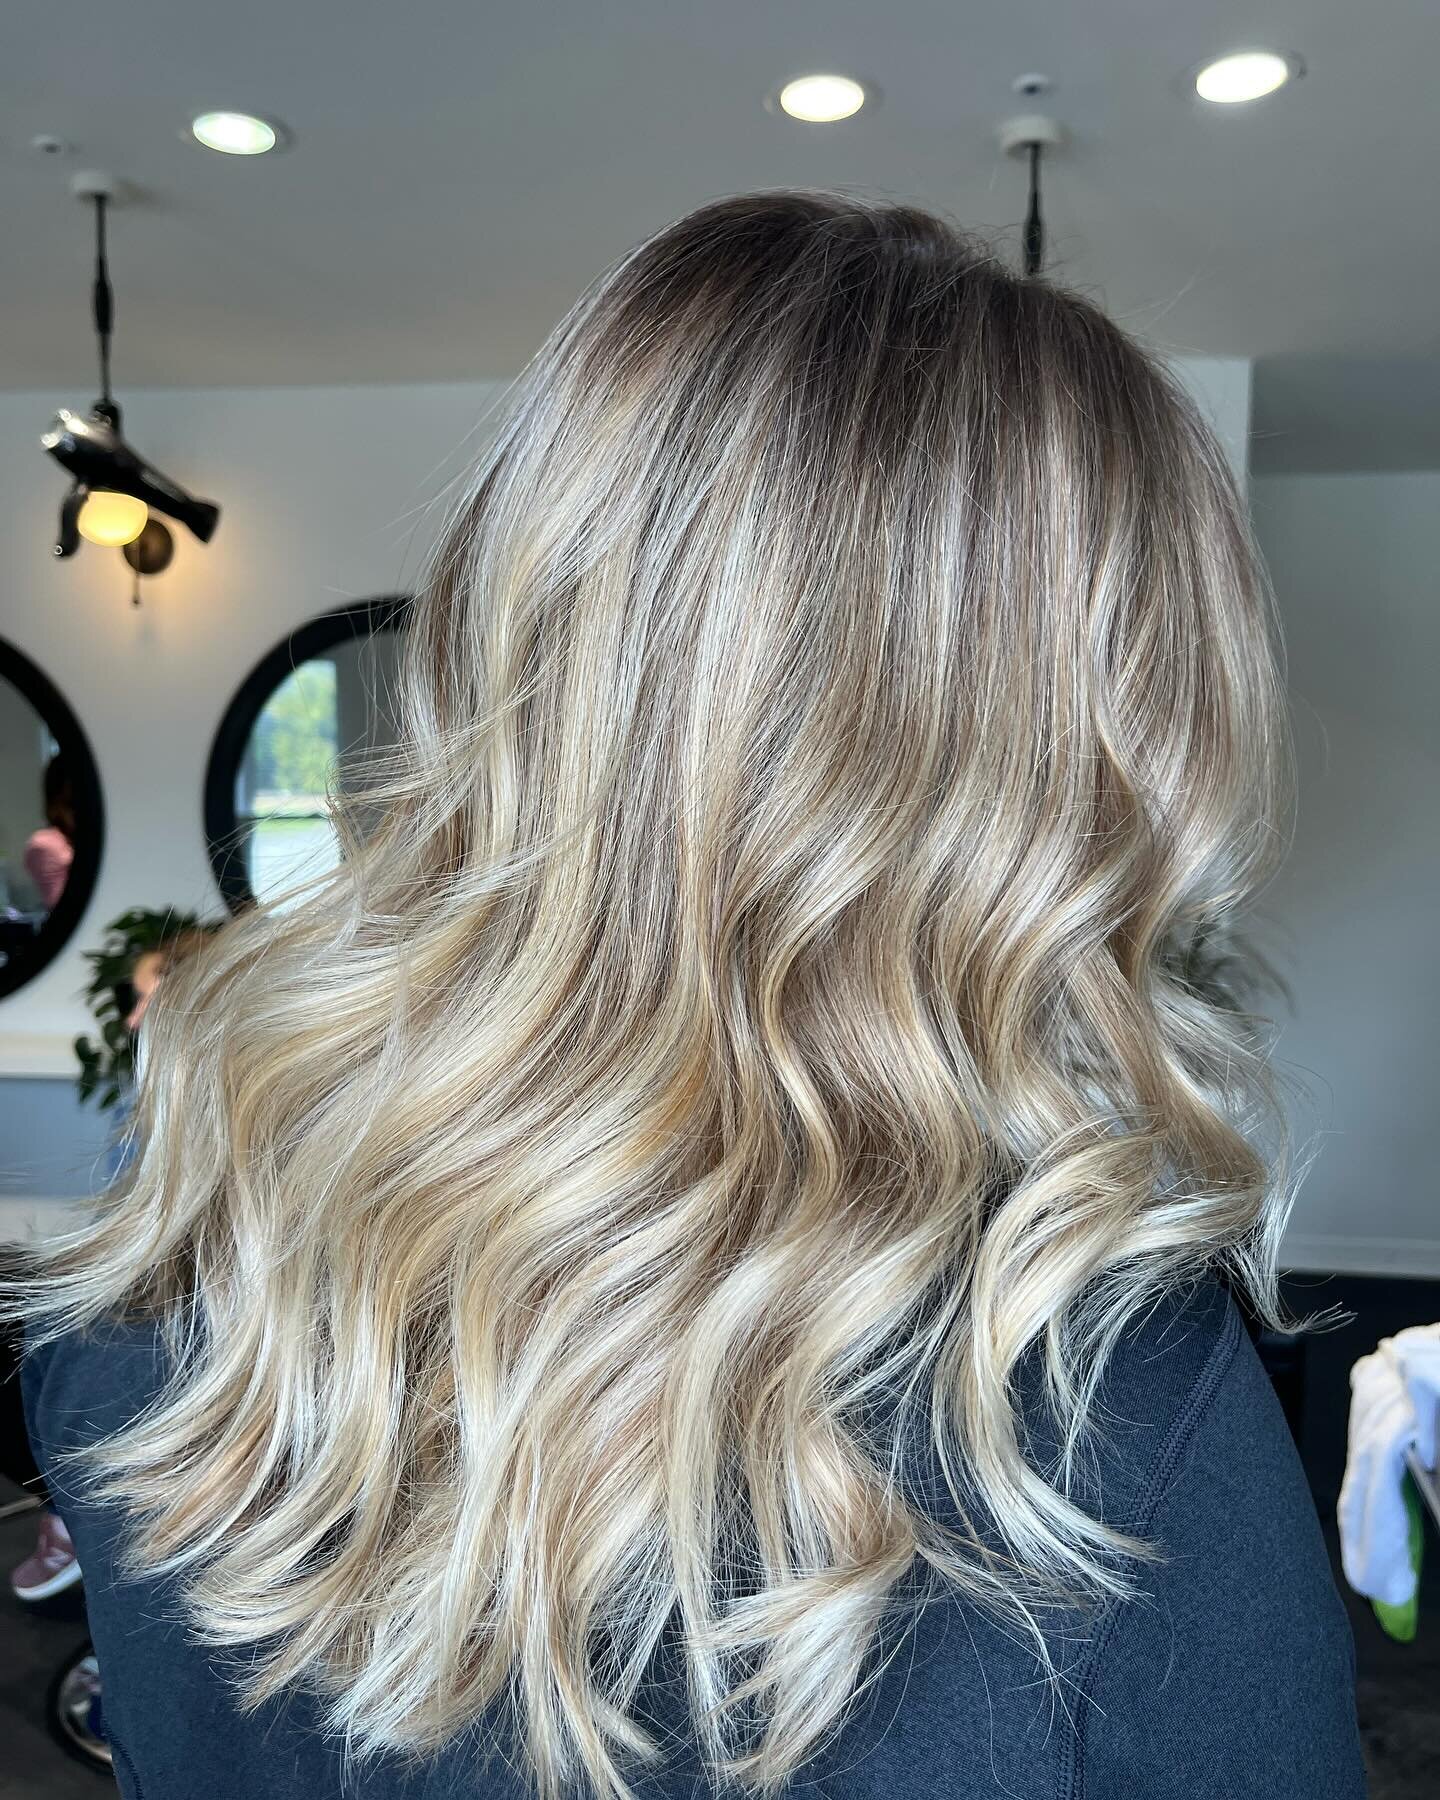 Chopped some length, added highlights, and double toned to erase some previous color ✂️✨🤍💛🎨🤩